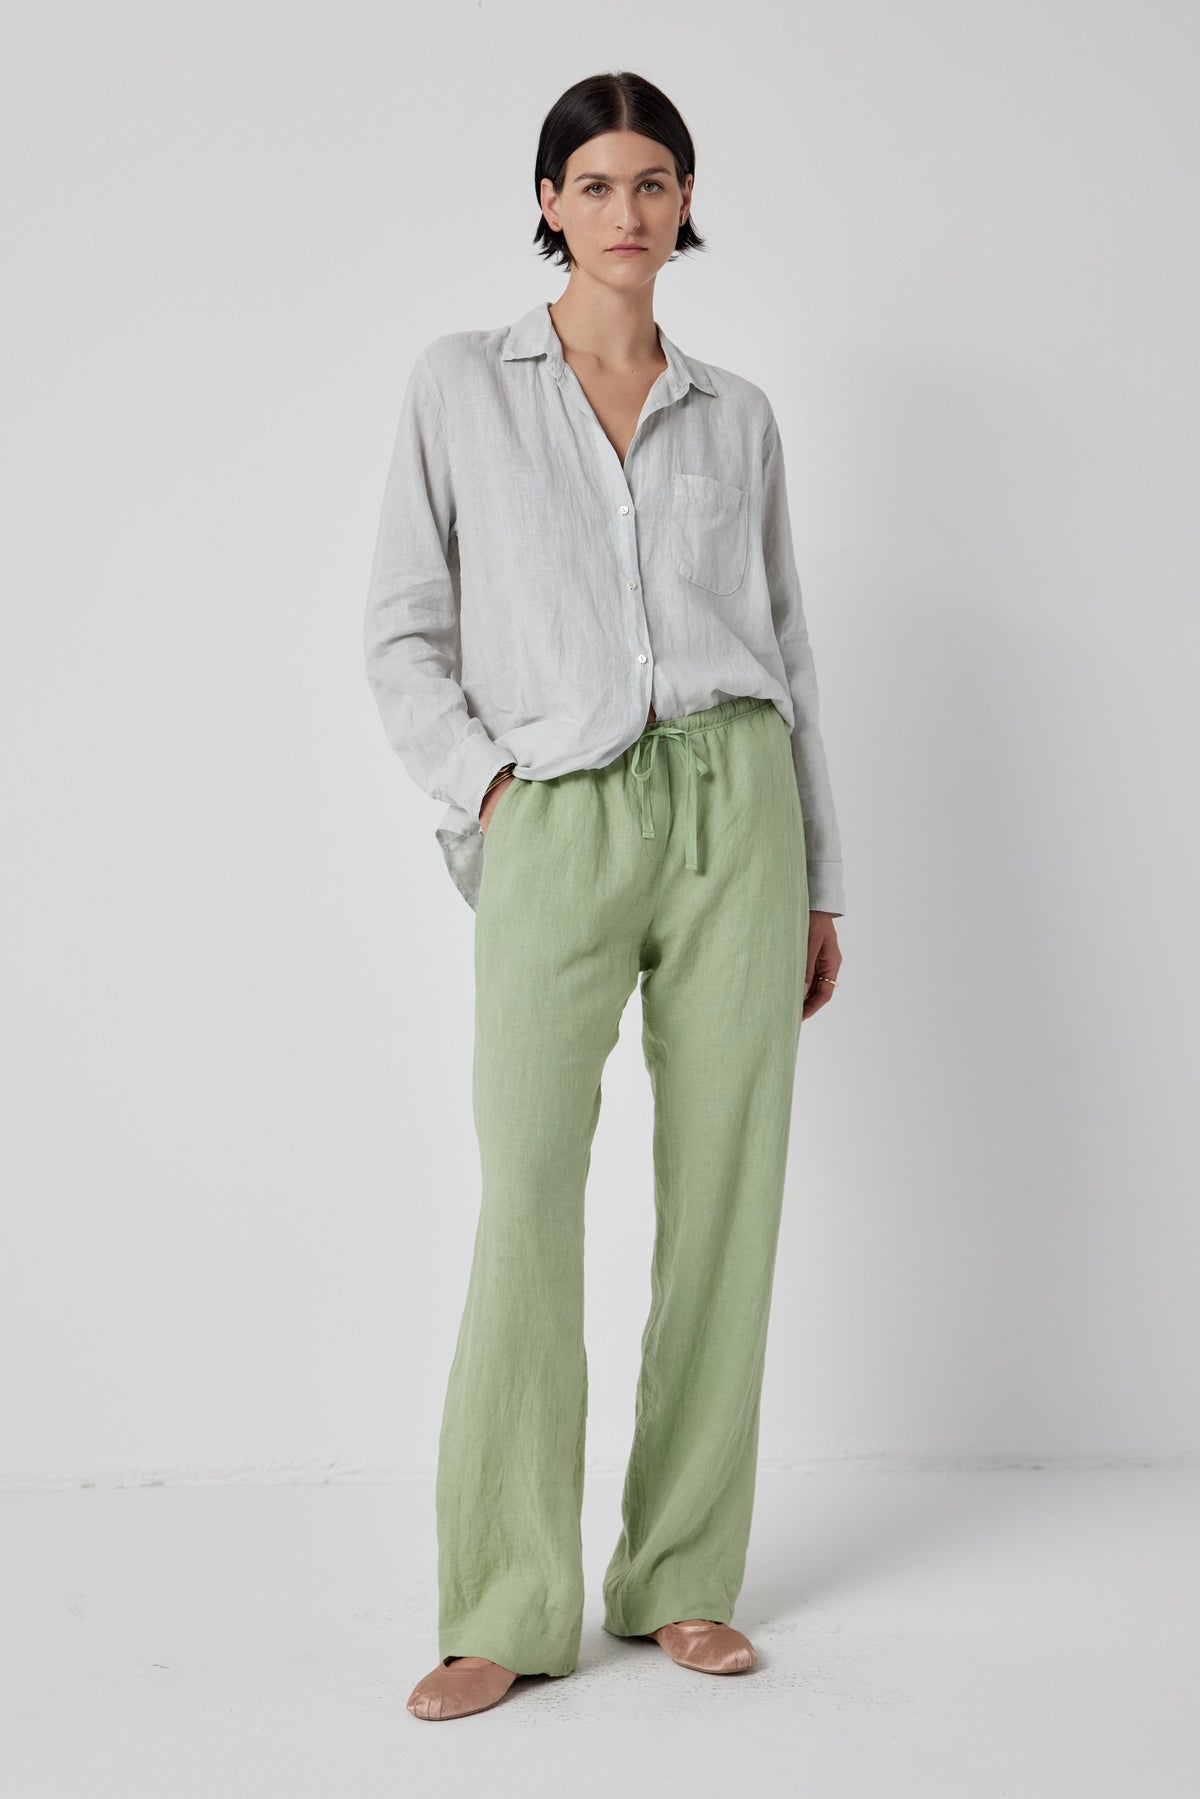 A woman stands against a white background wearing a loose-fitting grey shirt, soft linen Velvet by Jenny Graham PICO PANT, and beige flat shoes.-36219023065281